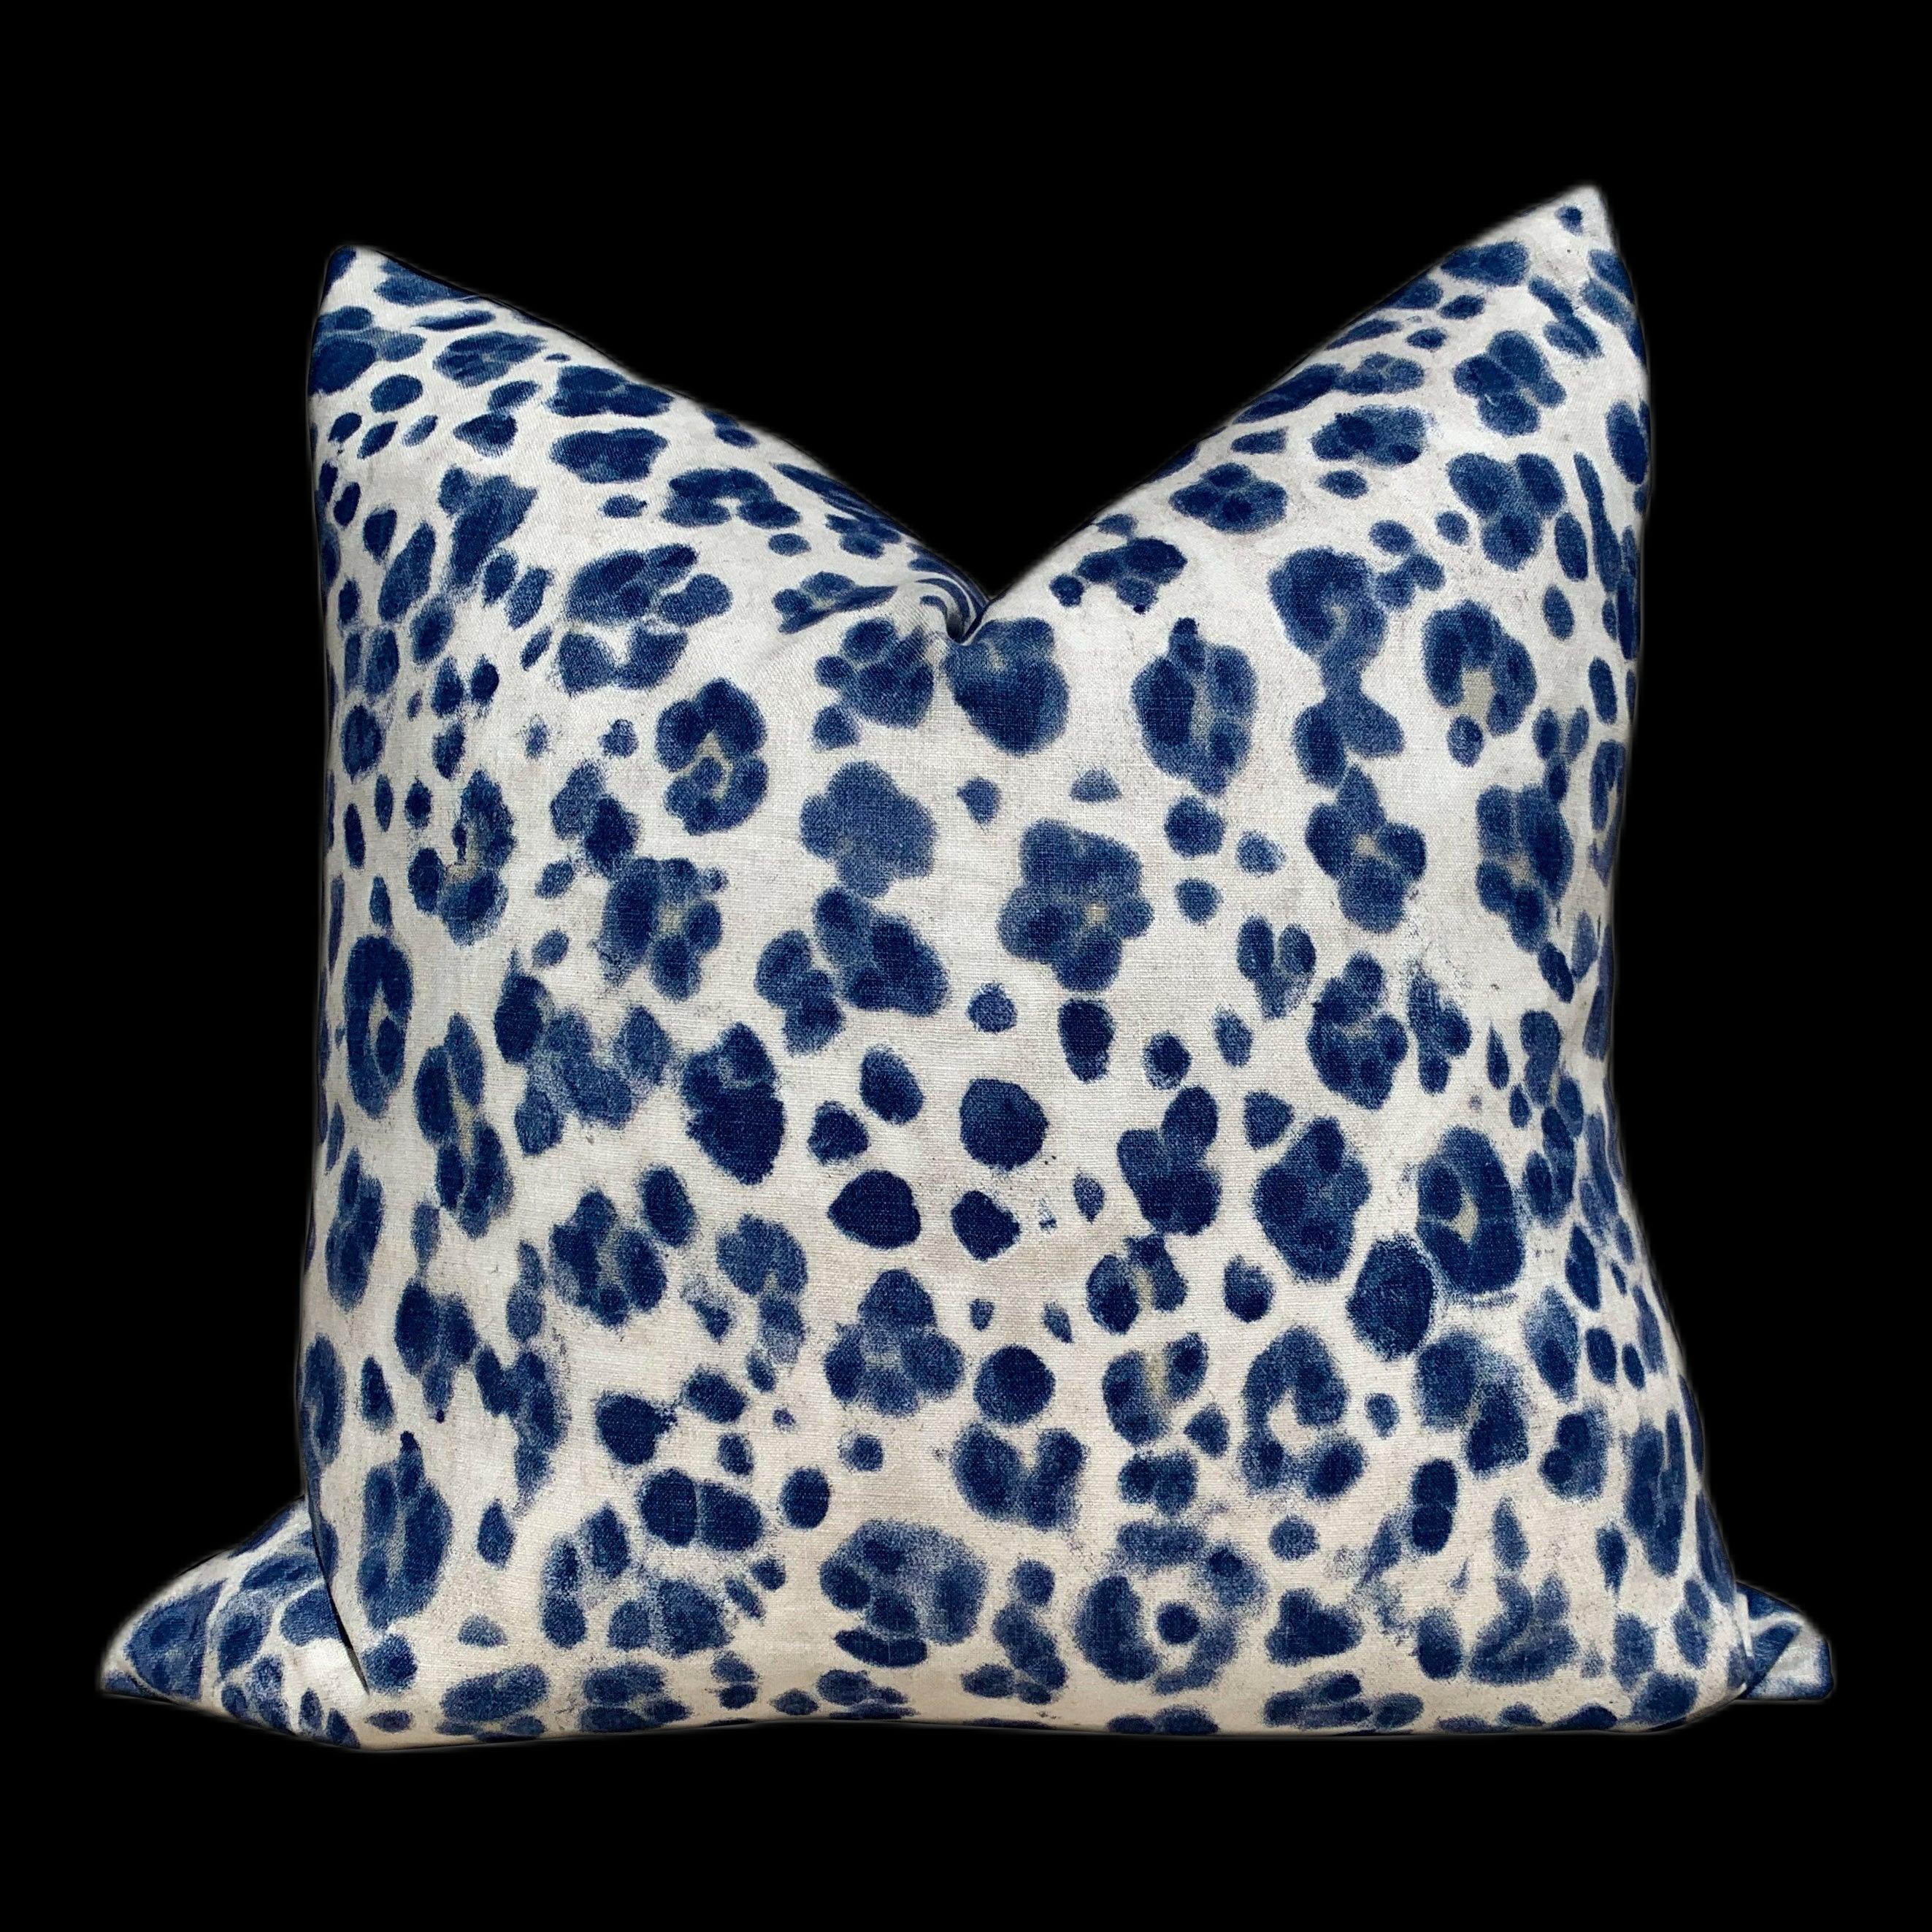 Panthera Linen Pillow Cover in Blue. Animal Skin Blue and White Lumbar Pillow cover, accent navy blue pillow sham, decorative euro sham